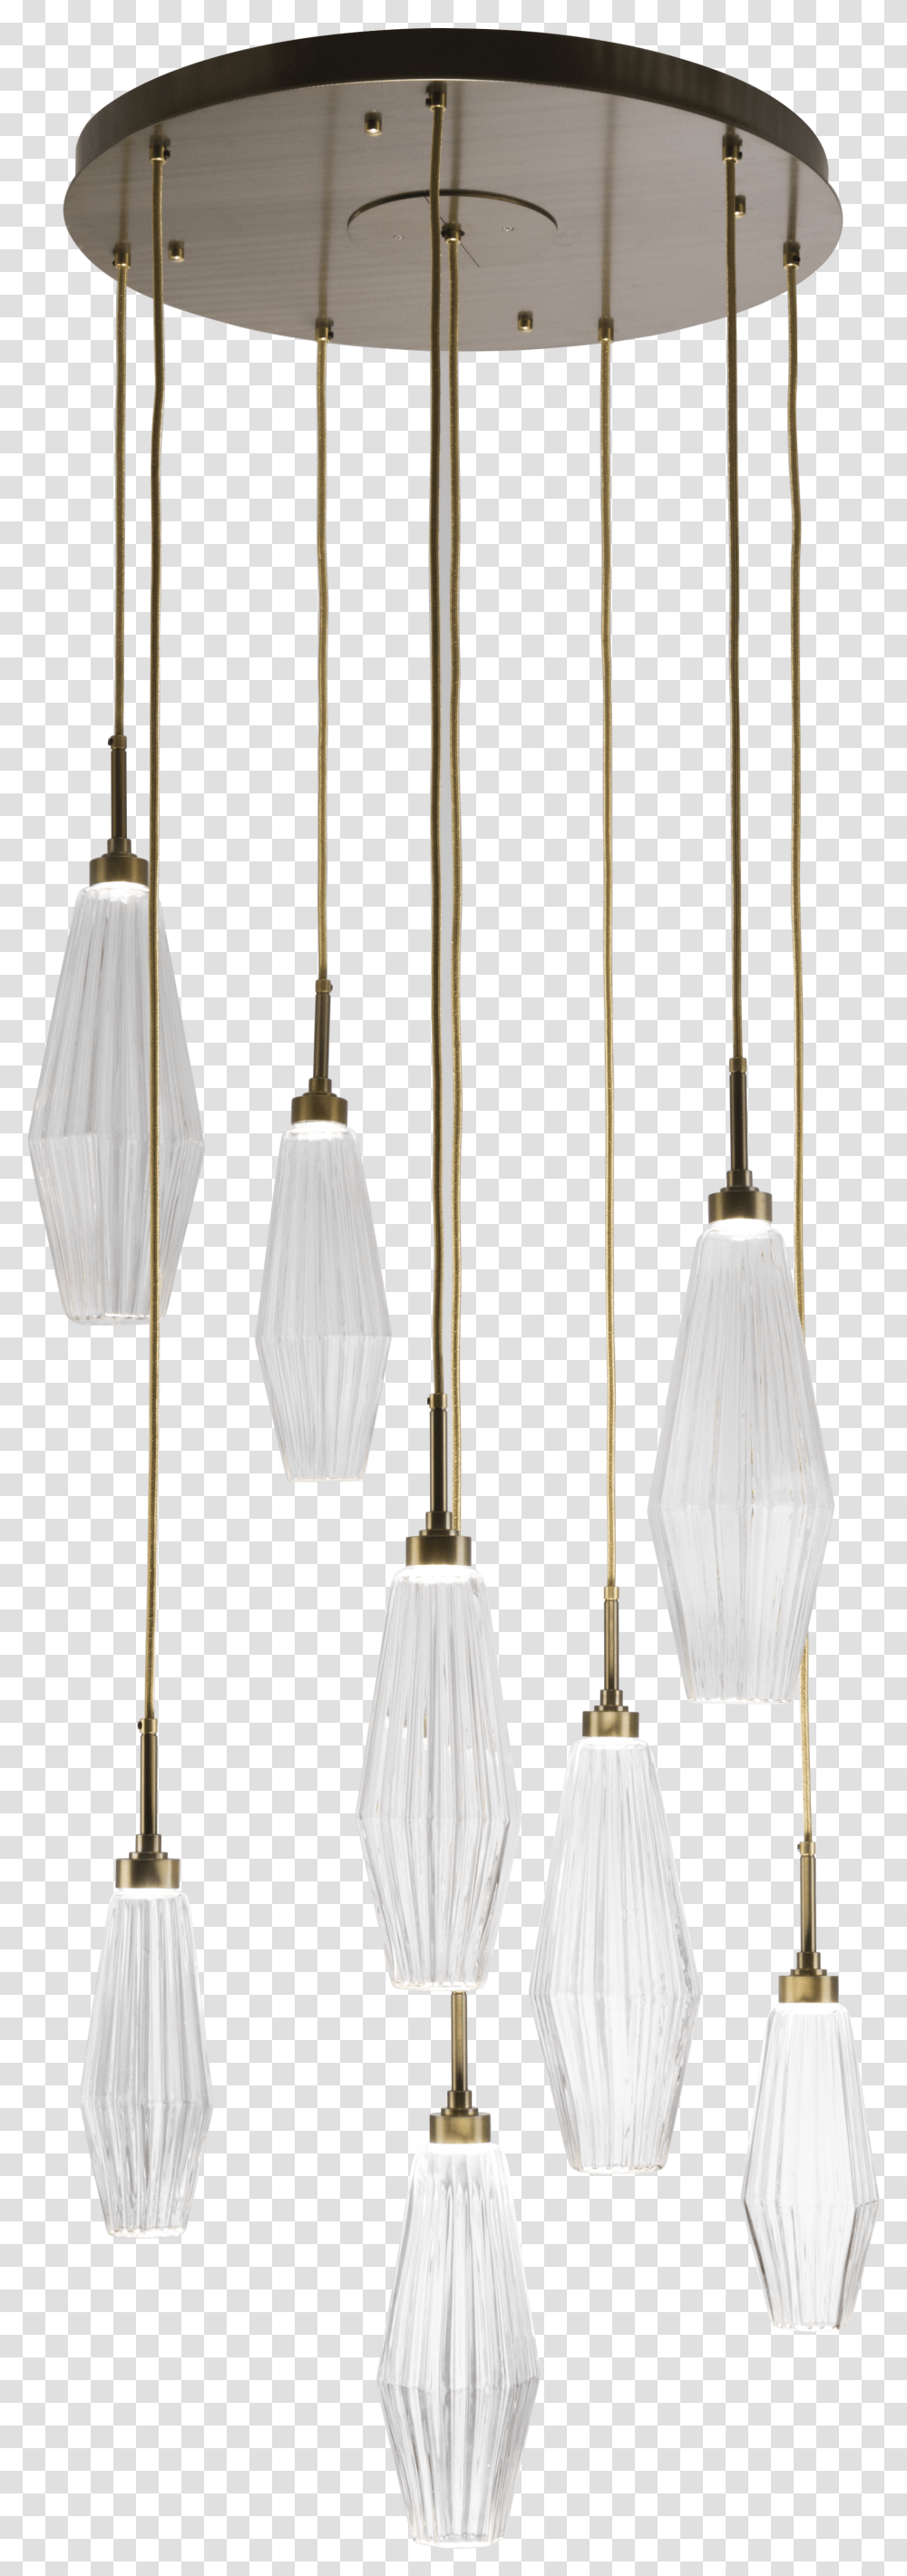 Chandeliers Lampshade Transparent Png